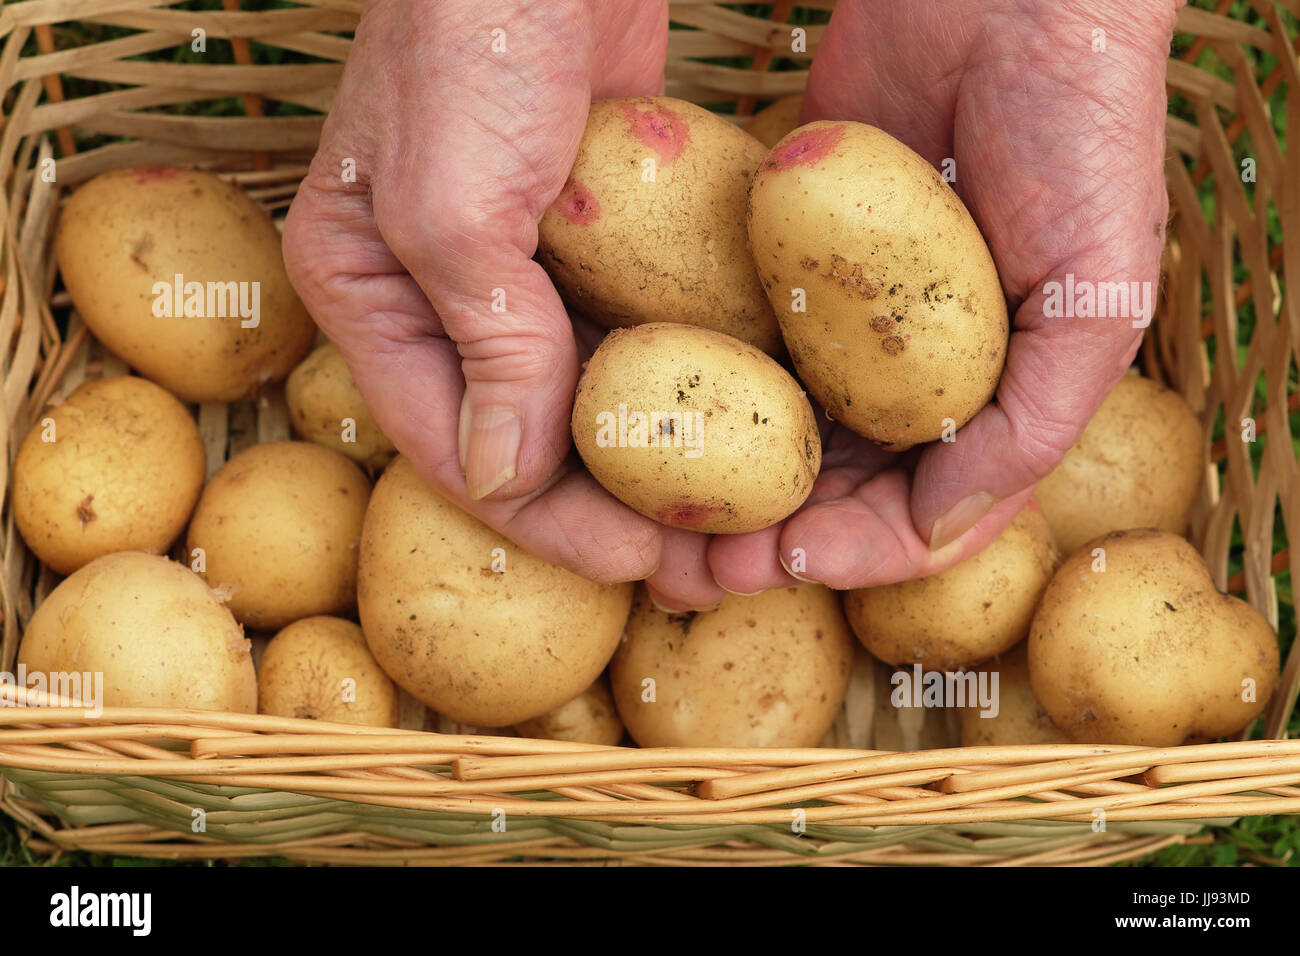 Close-up of hands harvesting Vales sovereign potatoes Stock Photo